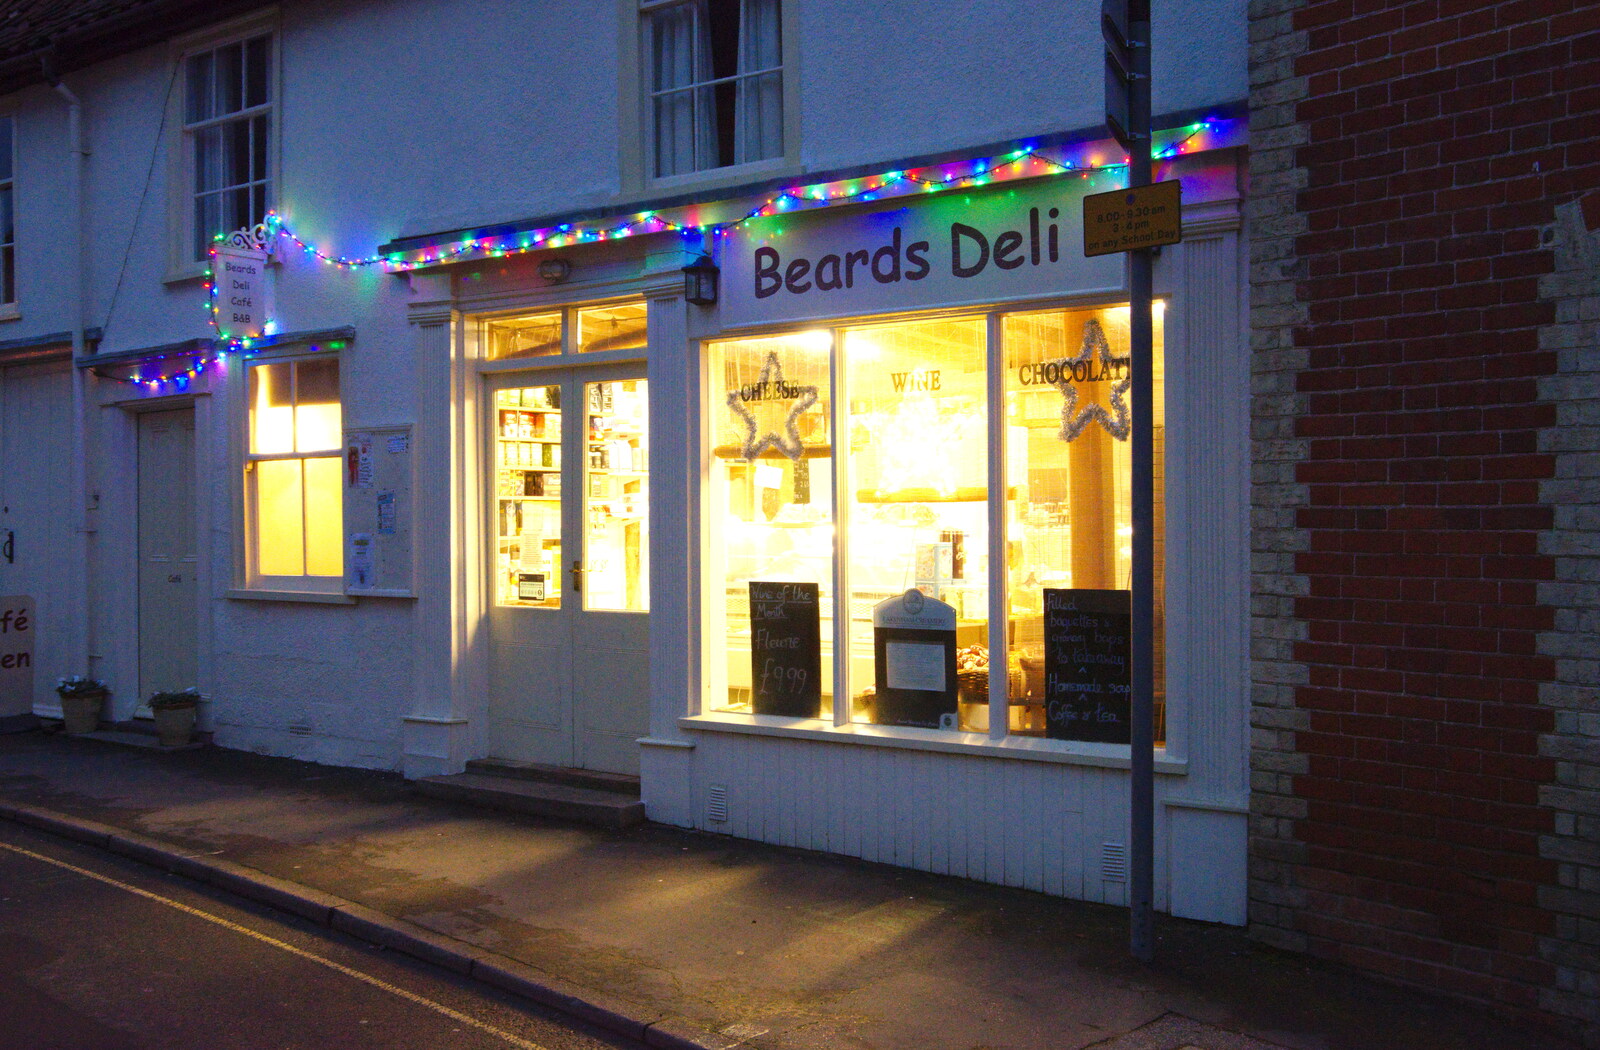 Beard's deli, with its Christmas lights up from Diss Panto and the Christmas Lights, Diss, Norfolk - 27th December 2019